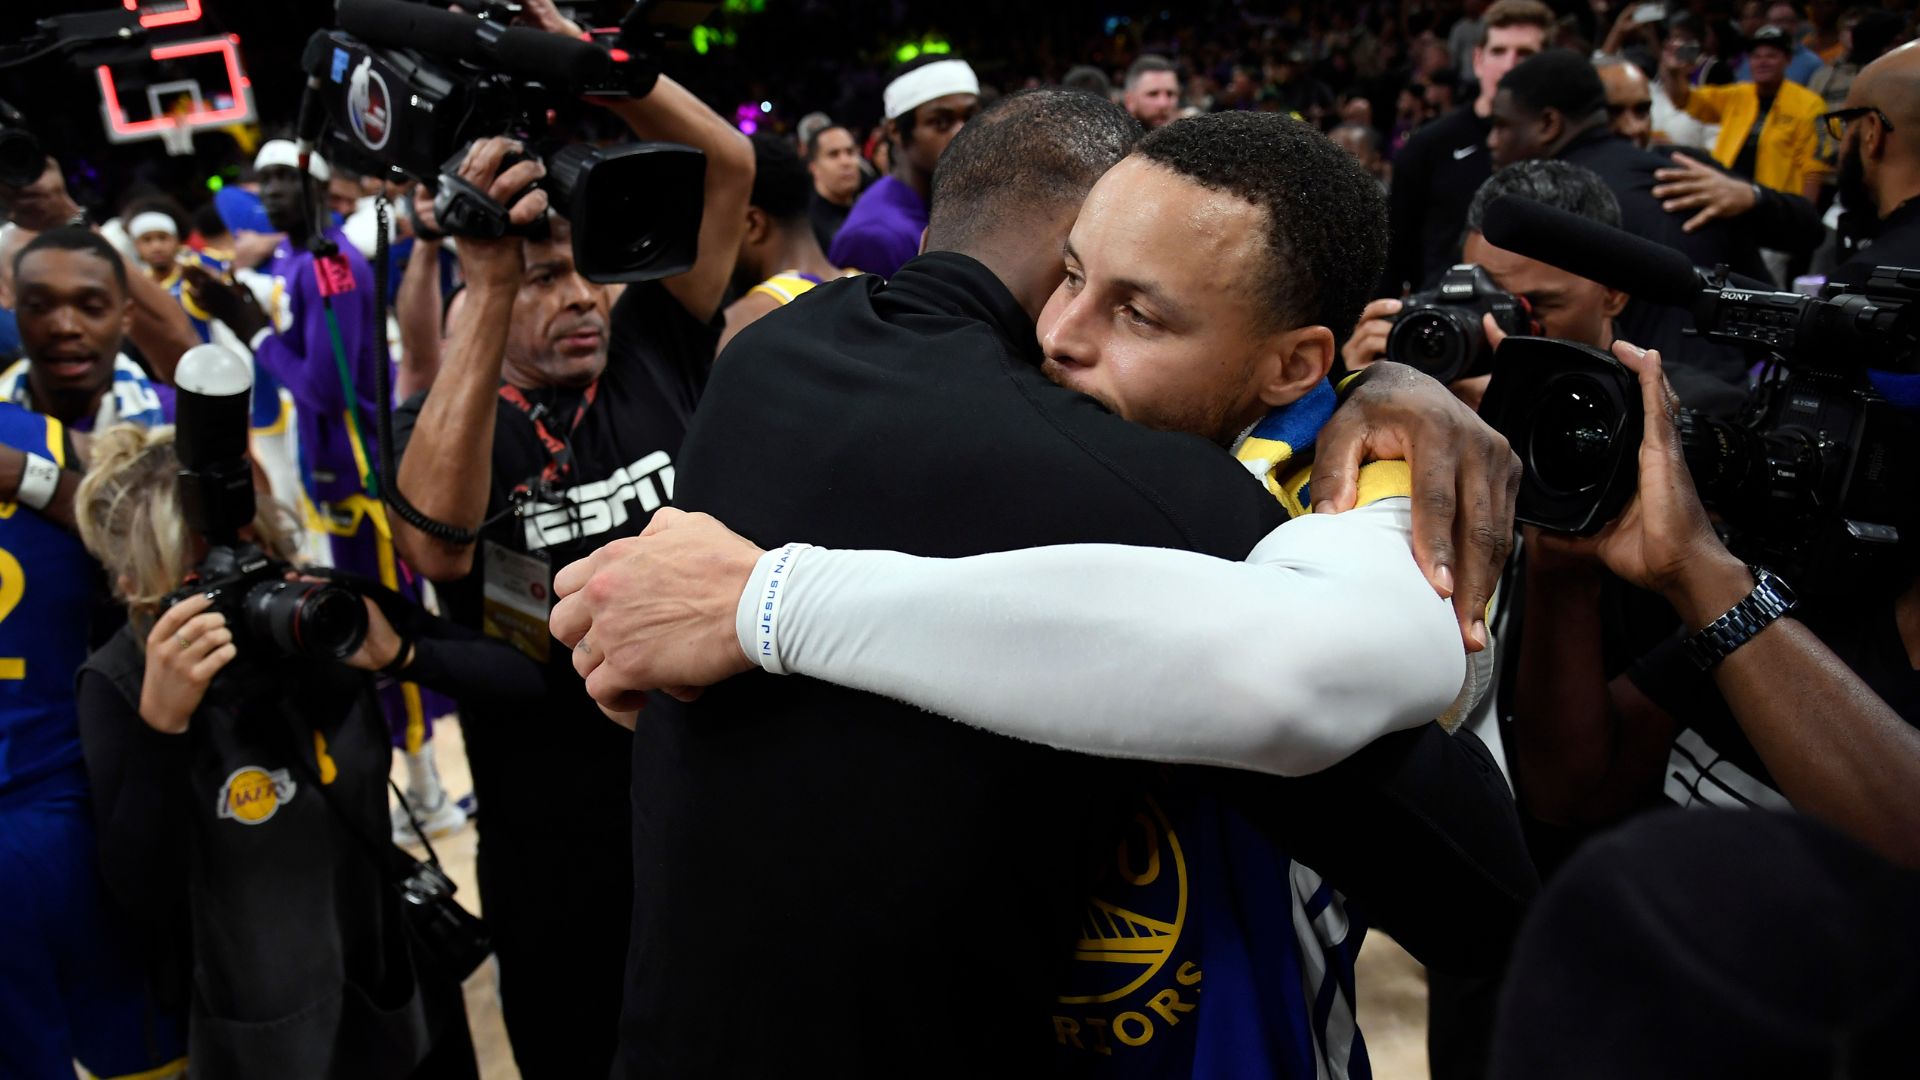 LeBron of the Lakers and Curry of the Warriors